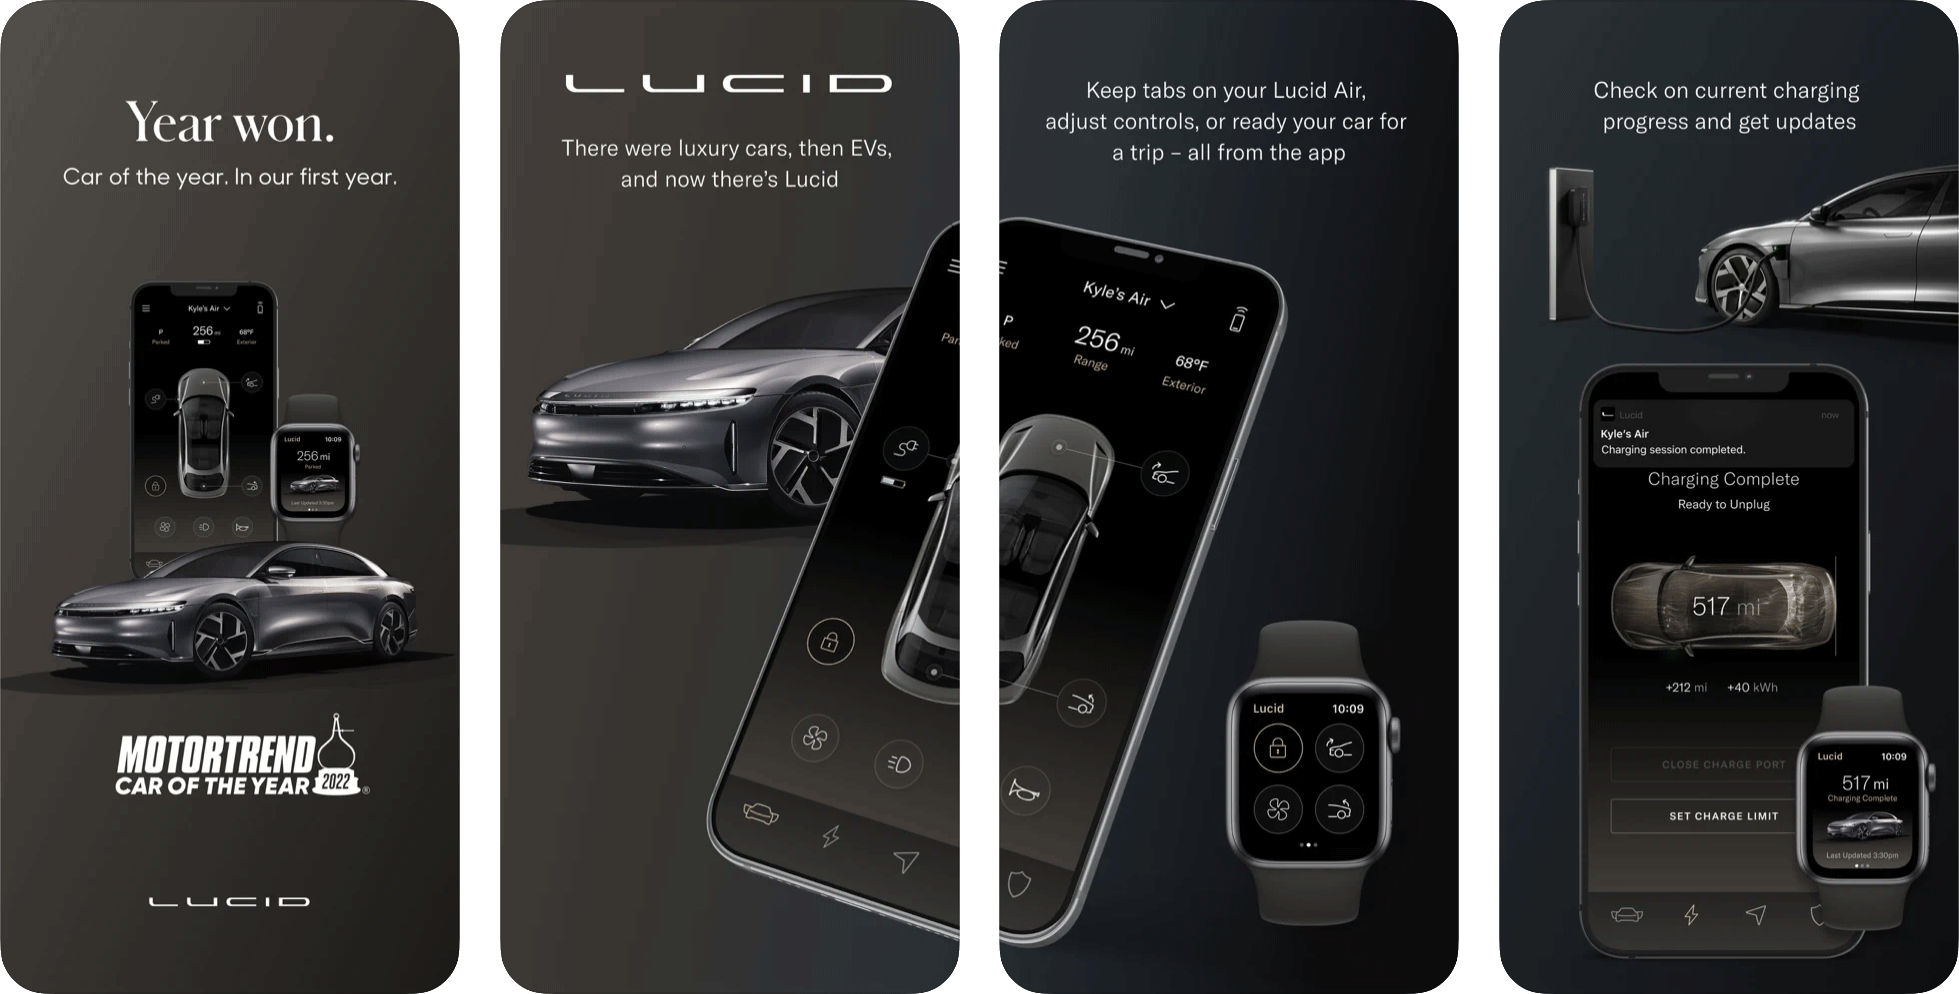 Lucid Motors Asks For Feature Requests For Lucid App